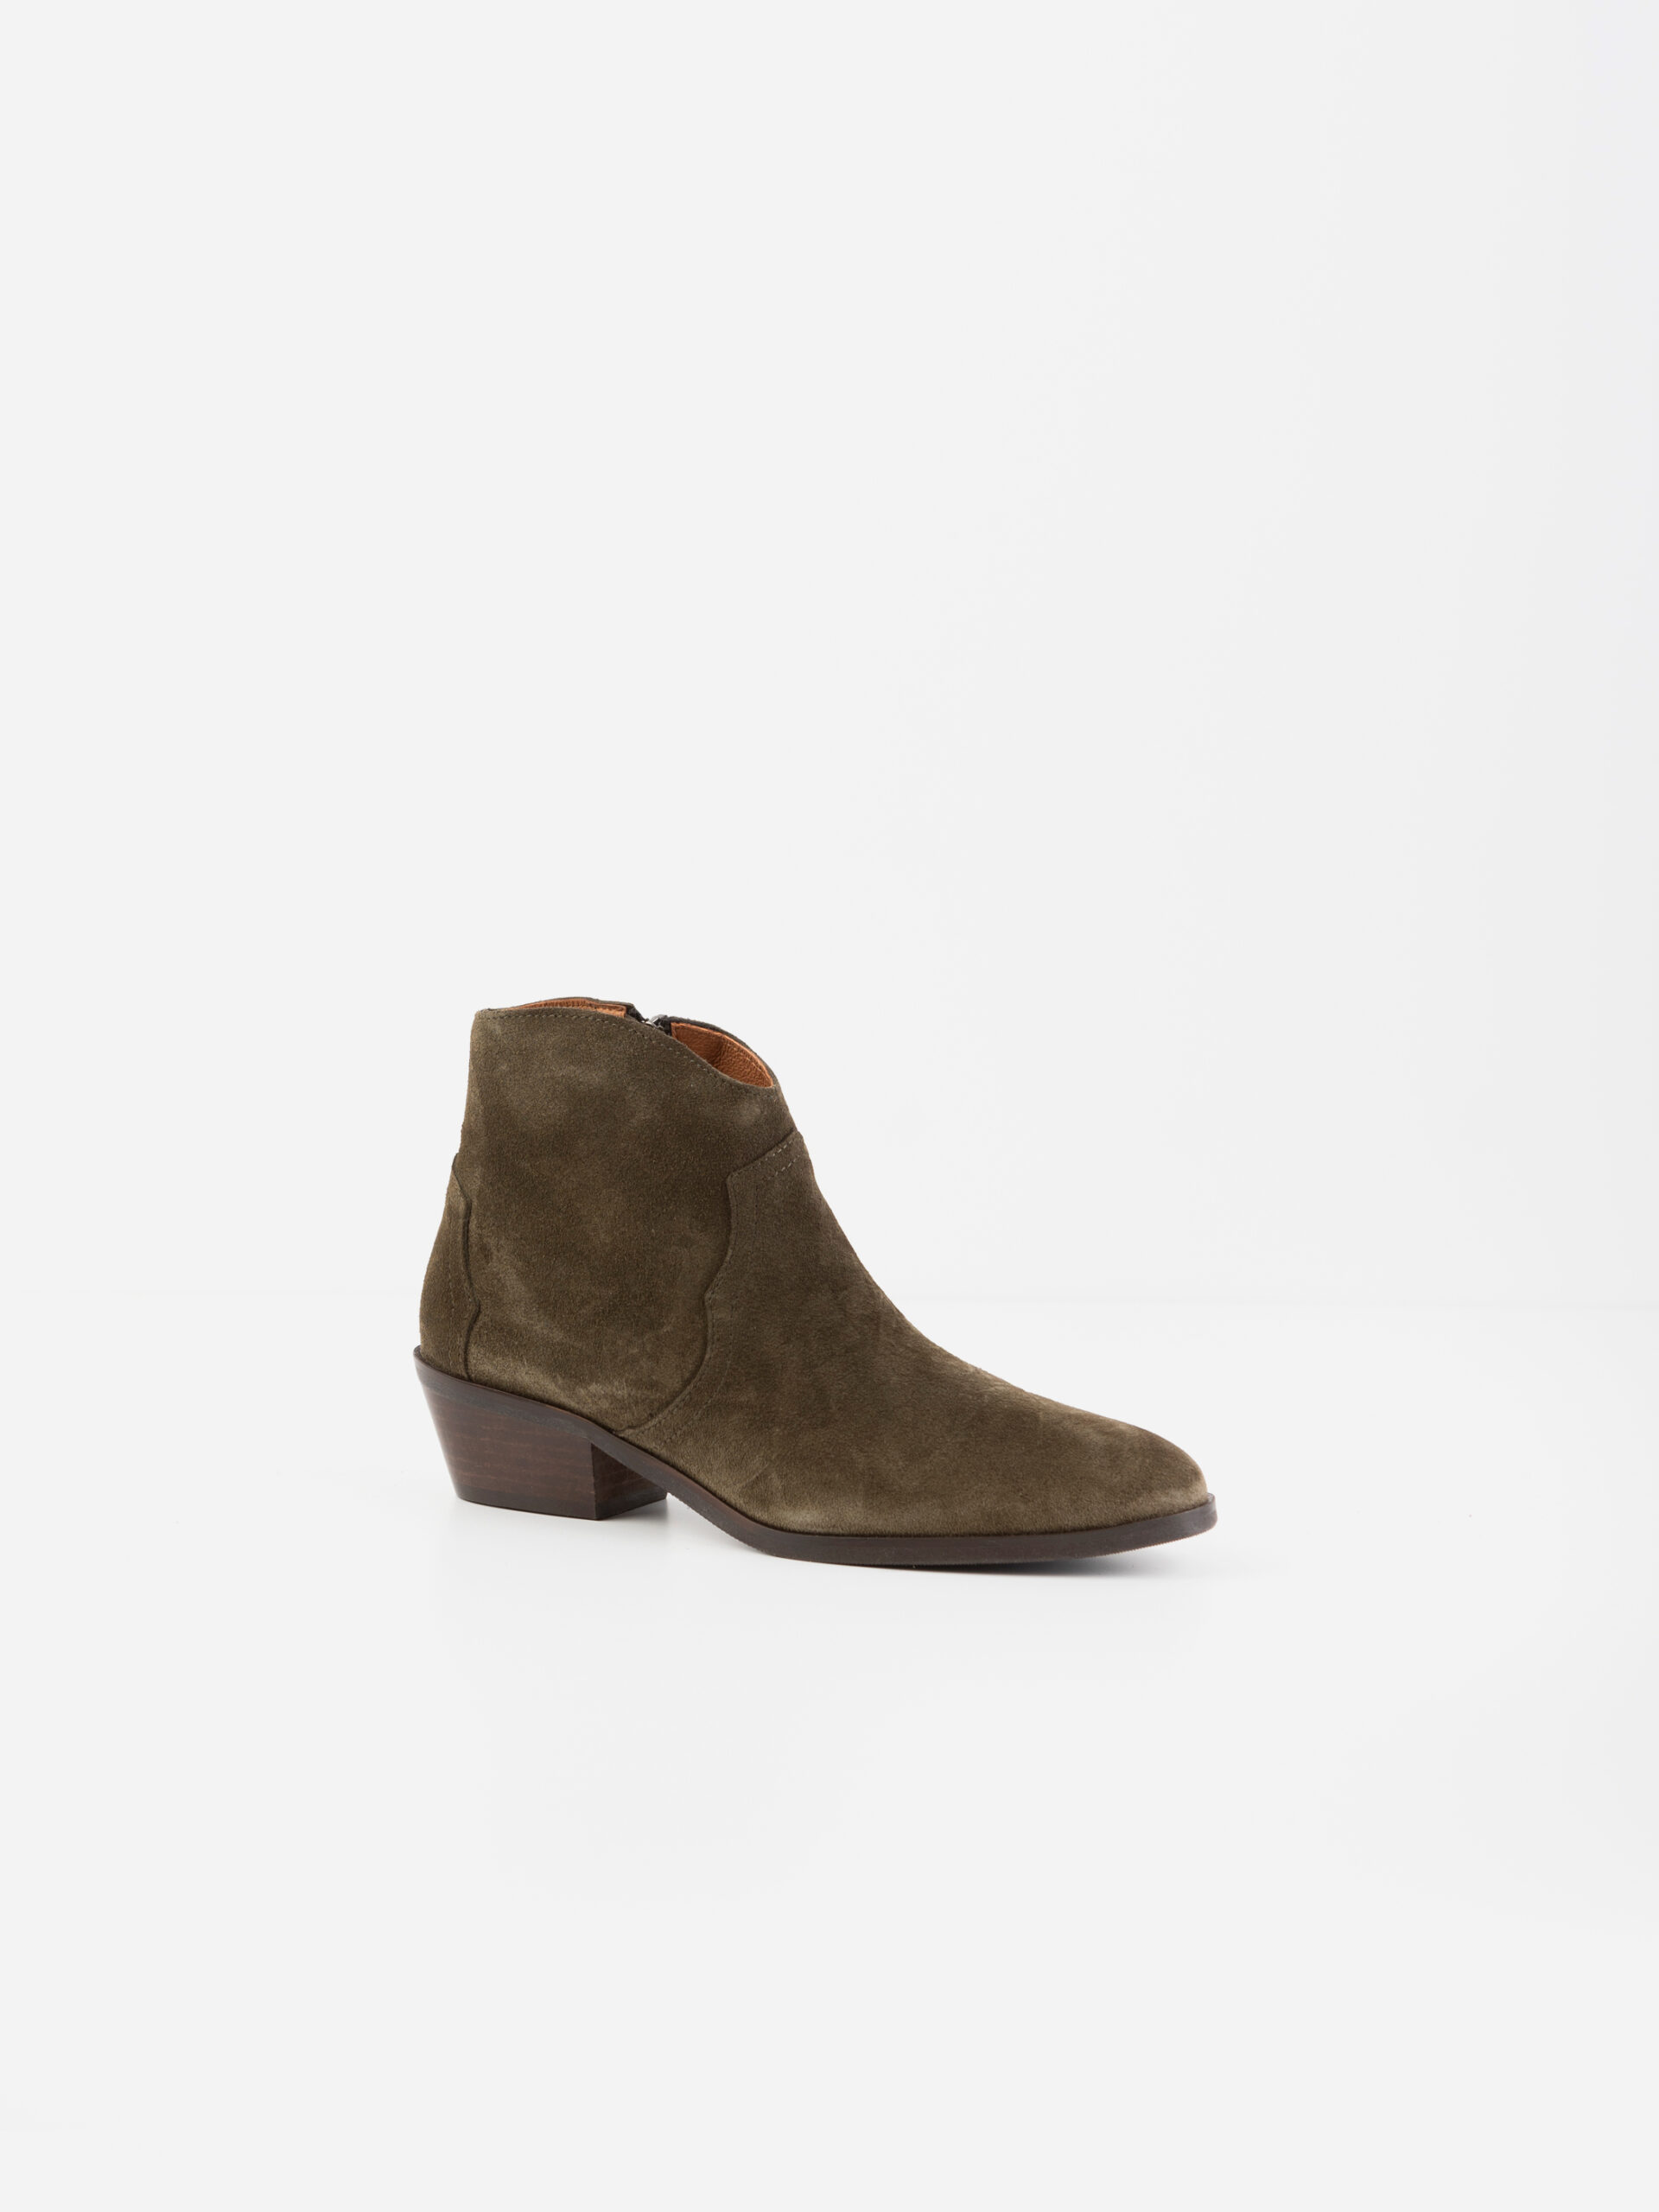 fiona-boots-suede-moss-green-booties-anonymus-matchboxathens